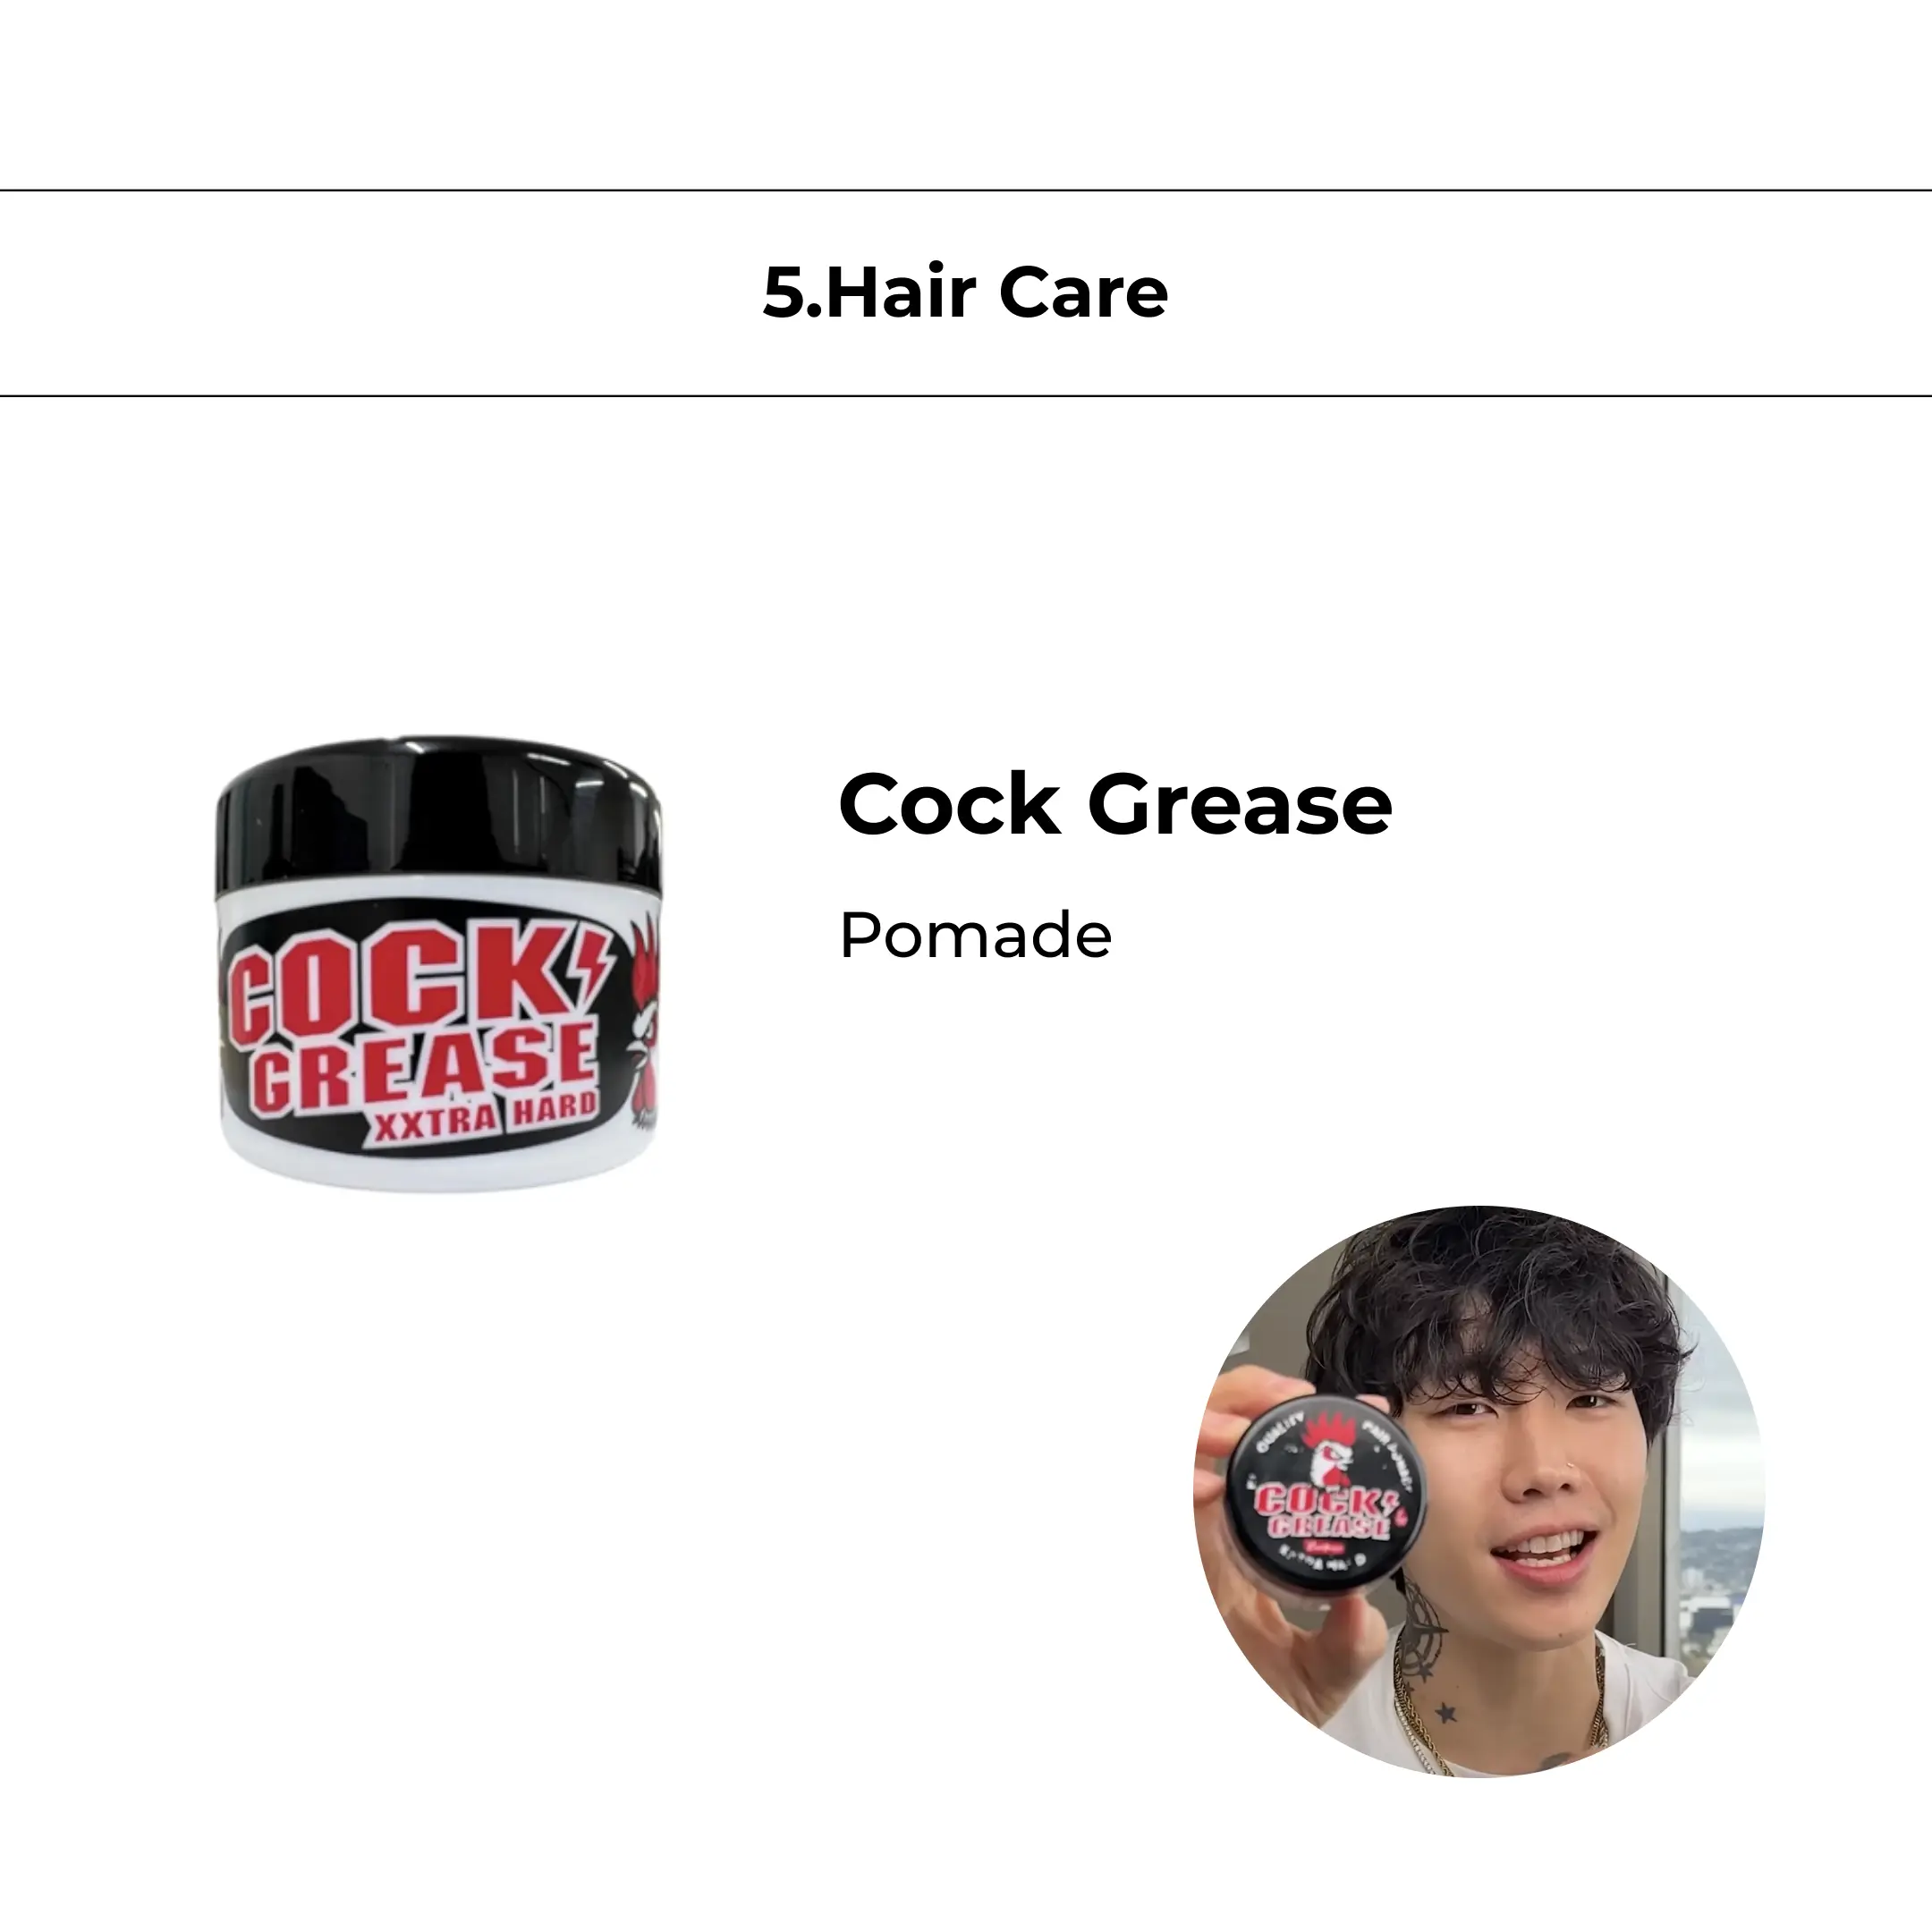 Cock Grease Pomade